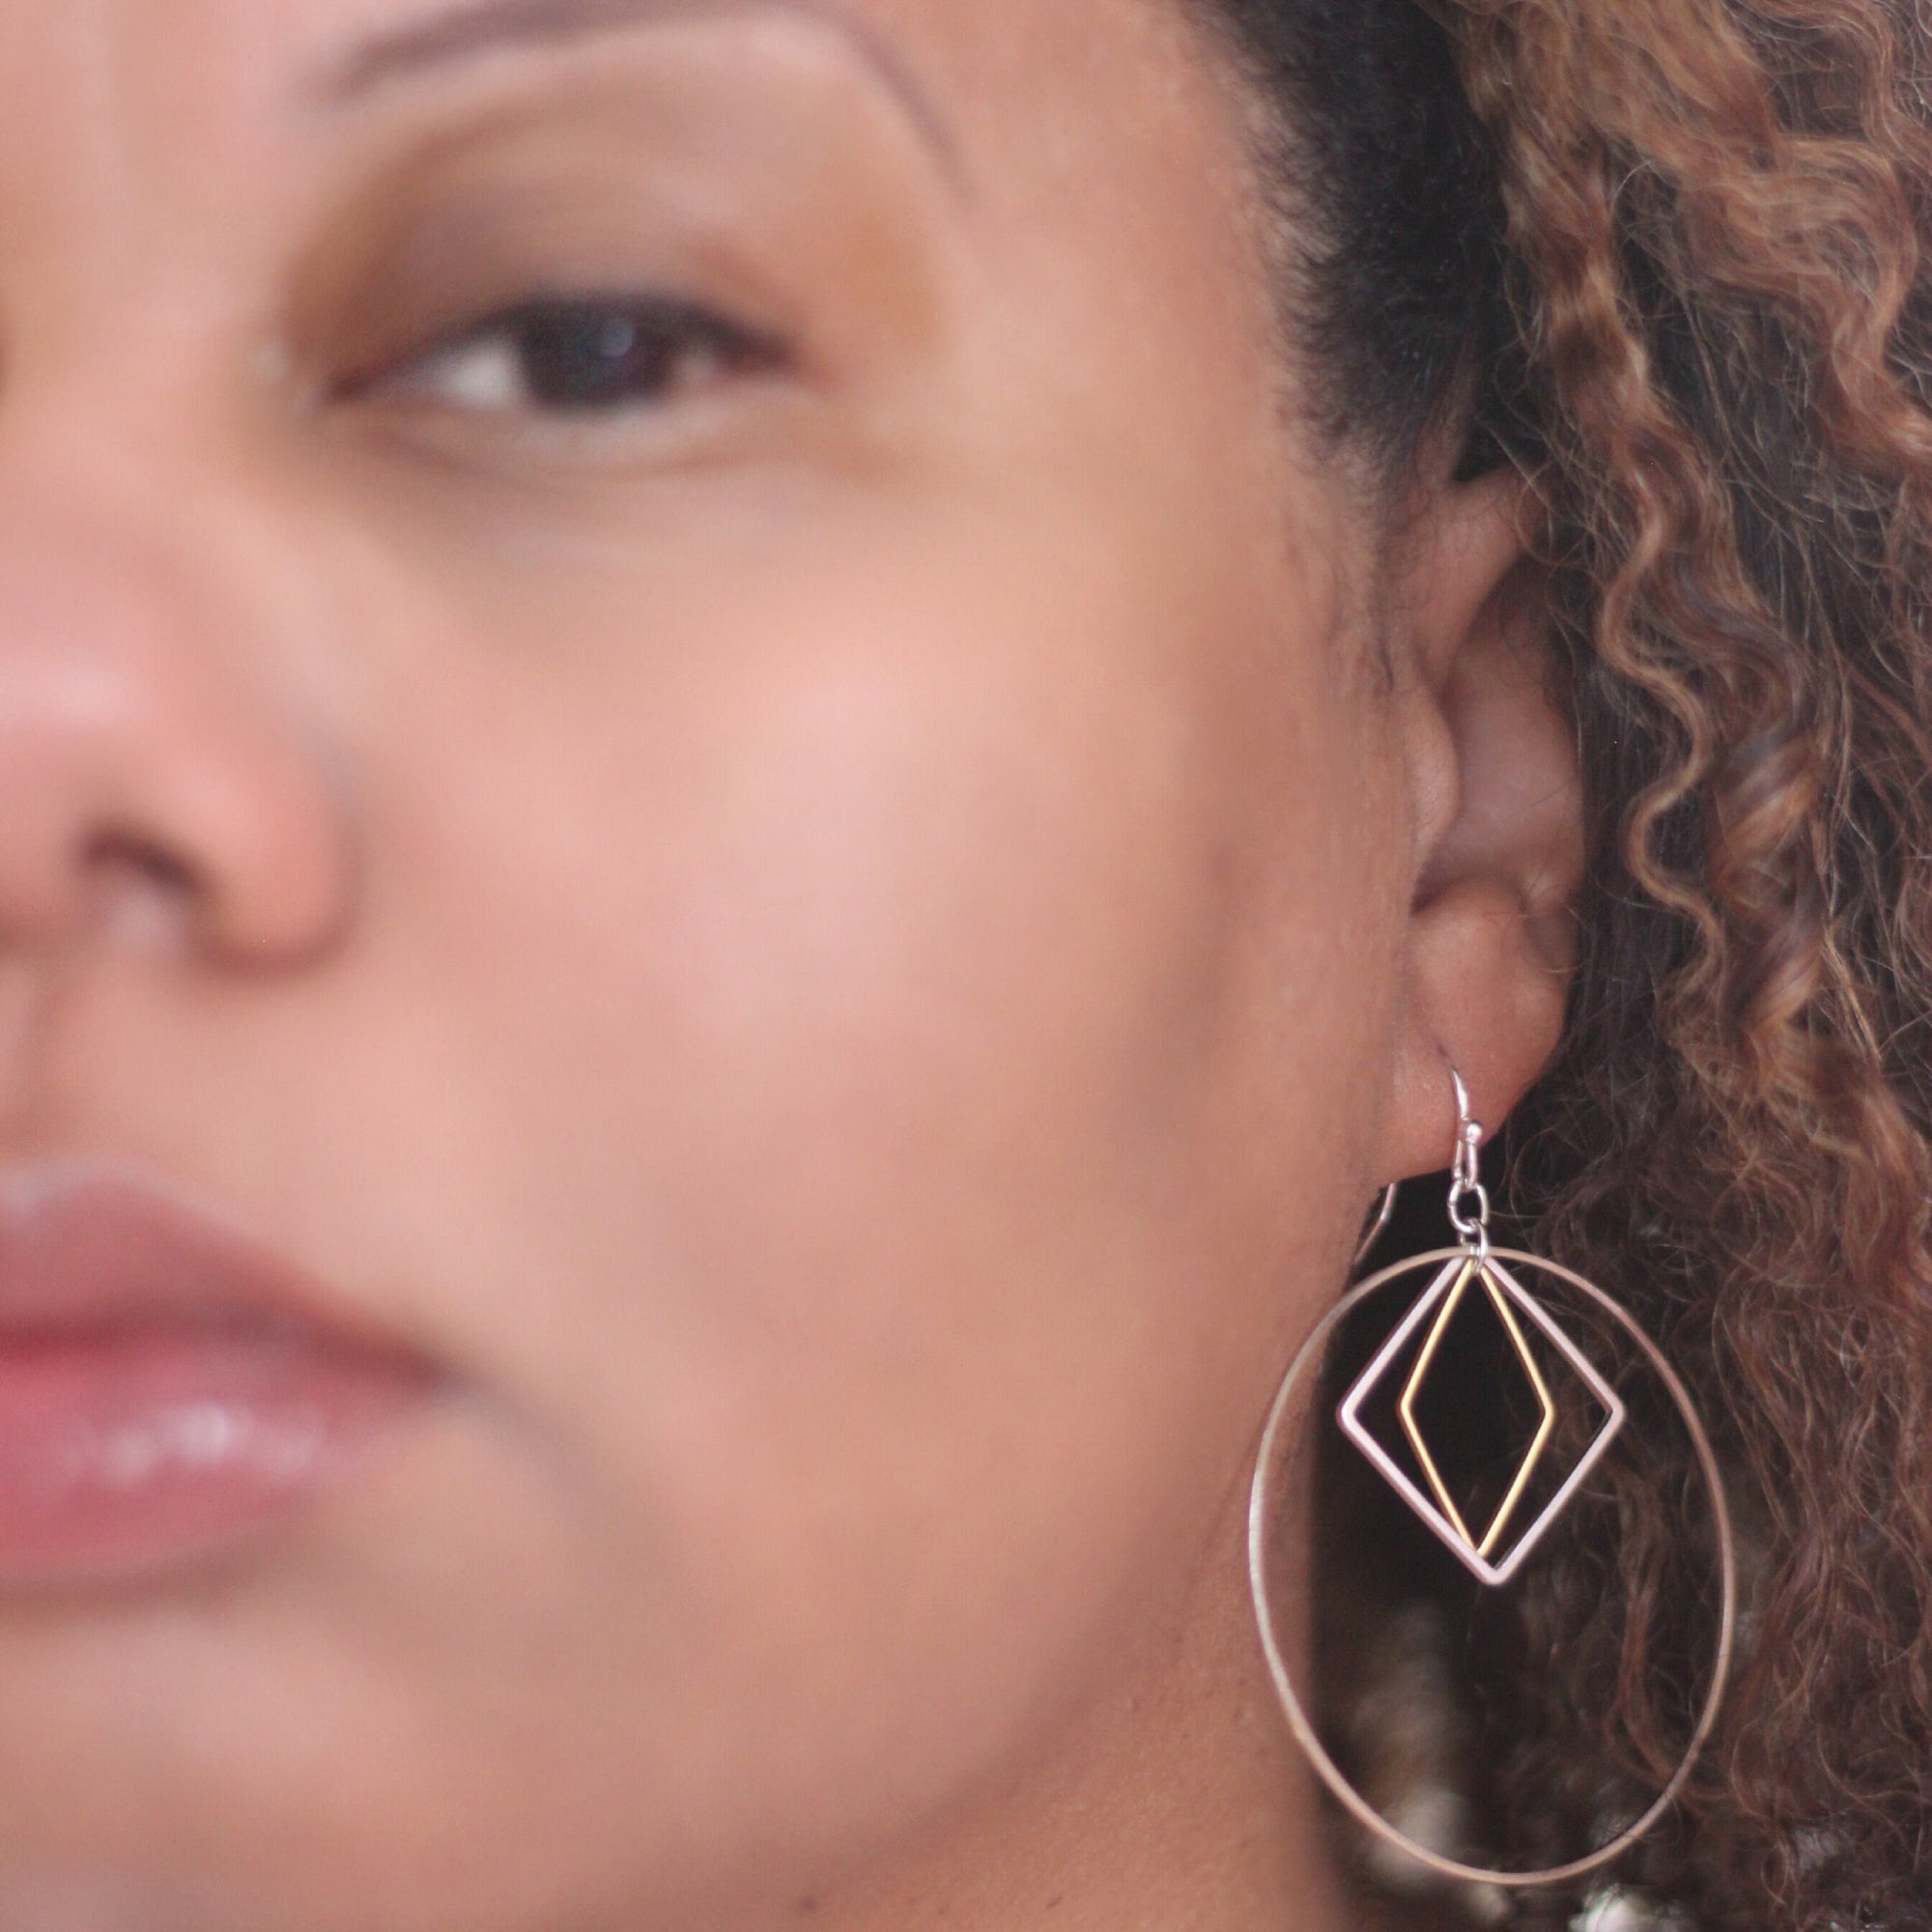 "Le Contour" Large Luxe Hoops in Matte Gold & Silver